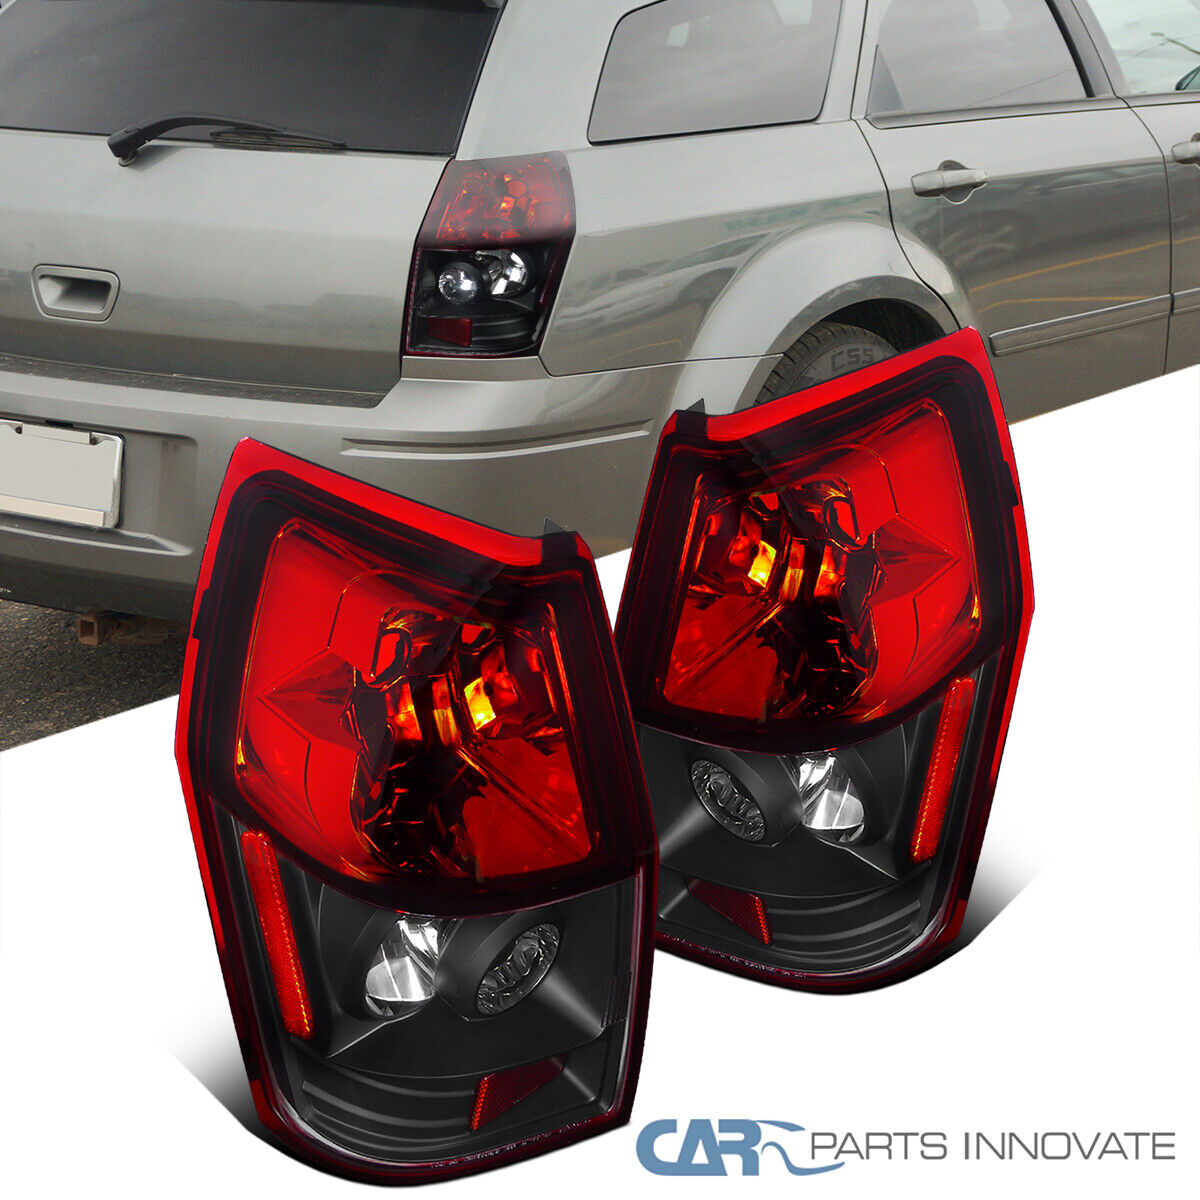 Fits 05-08 Dodge Magnum Black Red Tail Lights Rear Brake Lamps Pair Left+Right